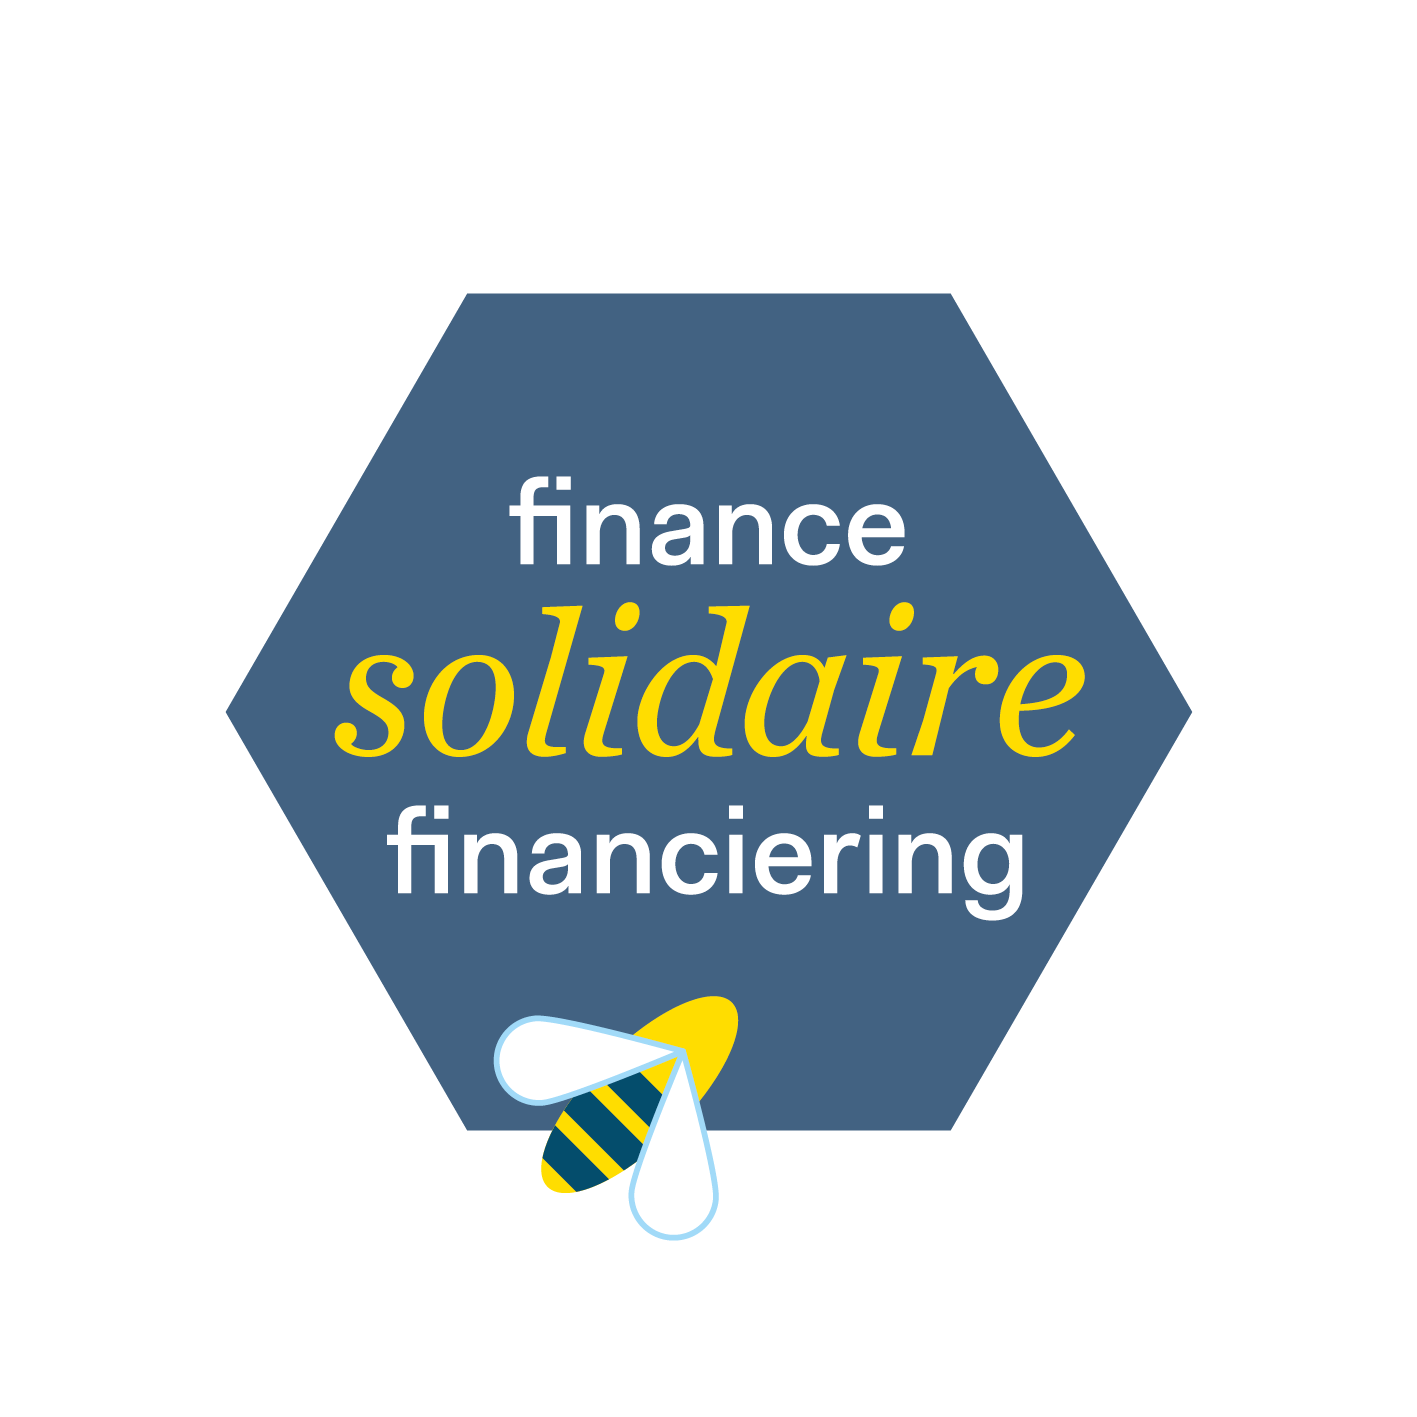 https://waldcube.be/wp-content/uploads/sites/5/2021/09/label_finance_solidaire_web.png